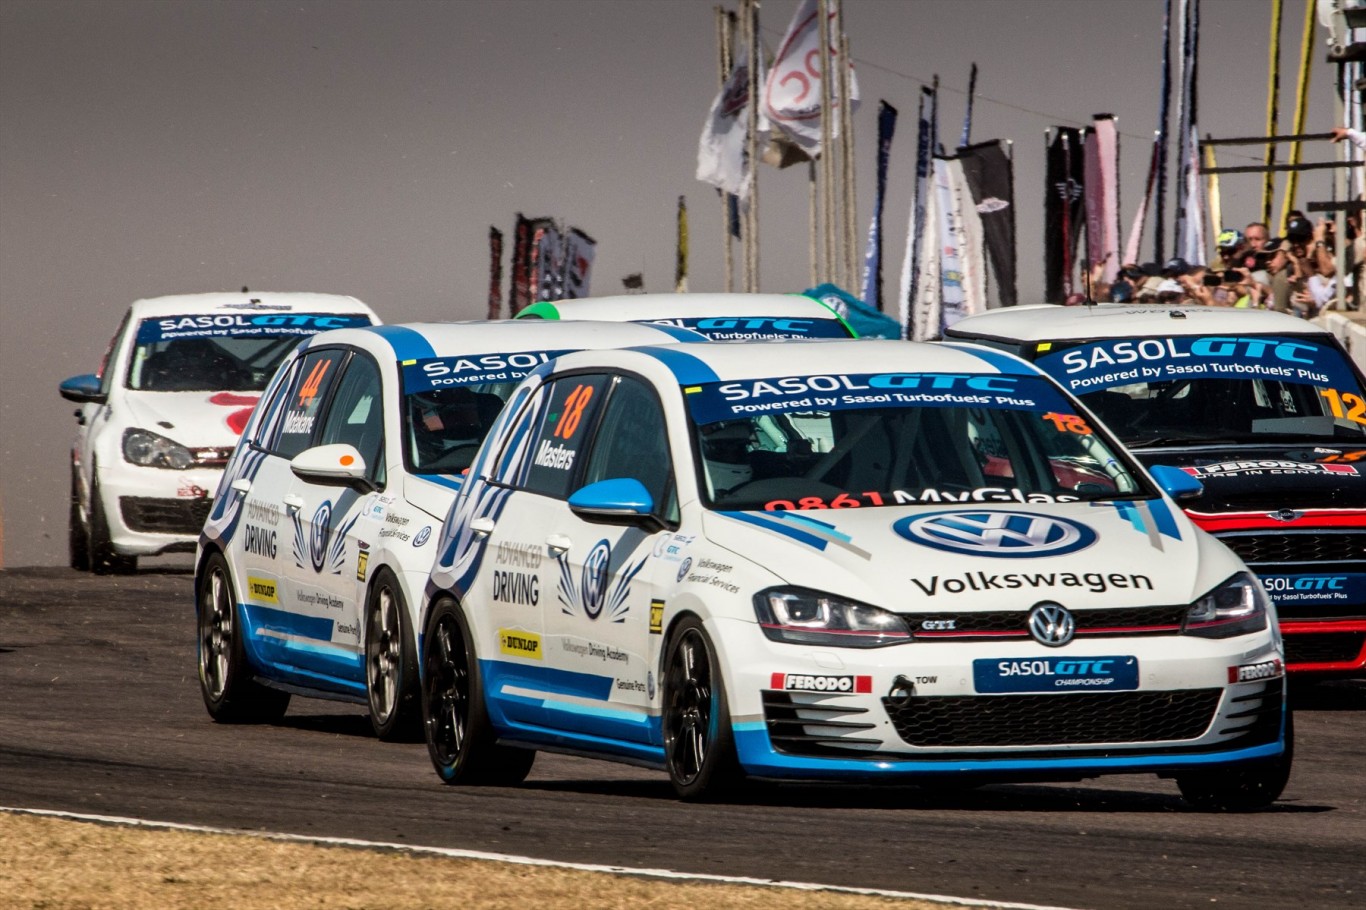 Final round of the 2017 Sasol GTC Series to be contested at Zwartkops